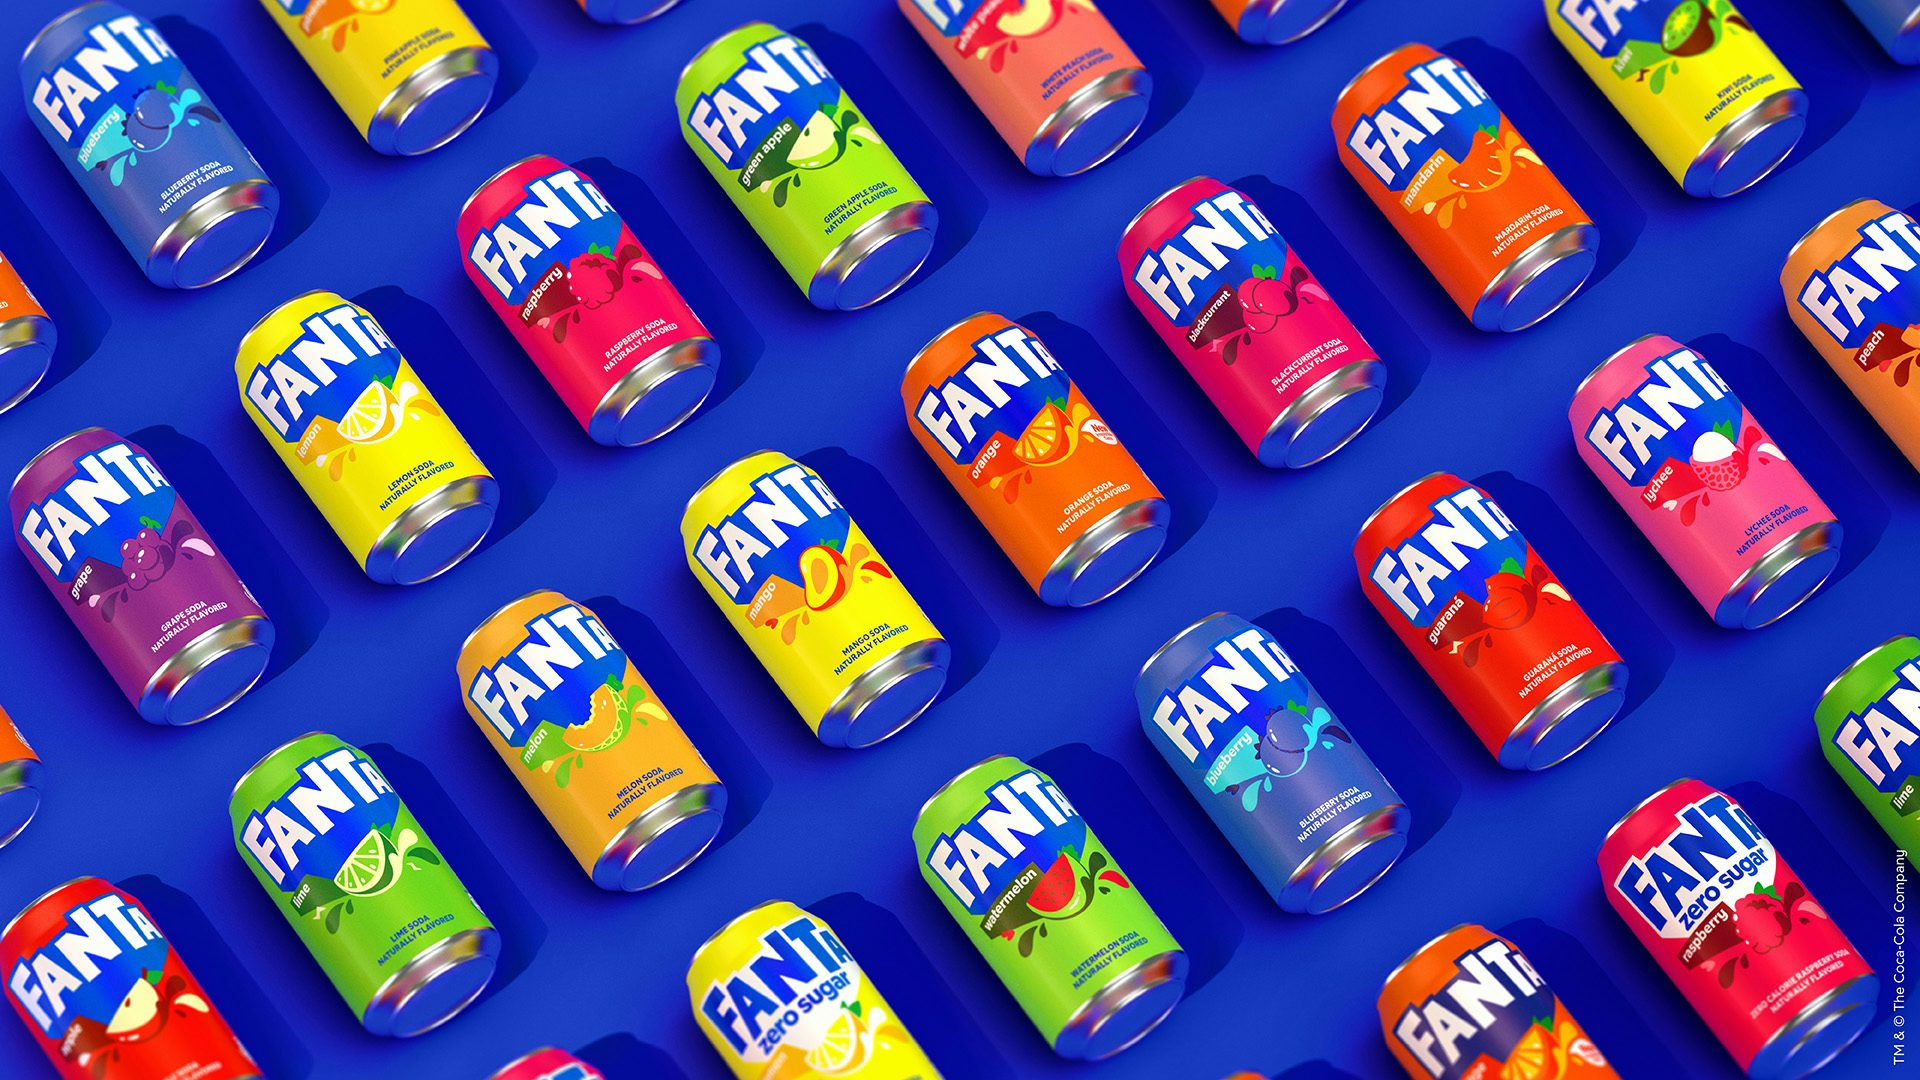 Image shows a range of Fanta drinks cans lined up on a bright blue background